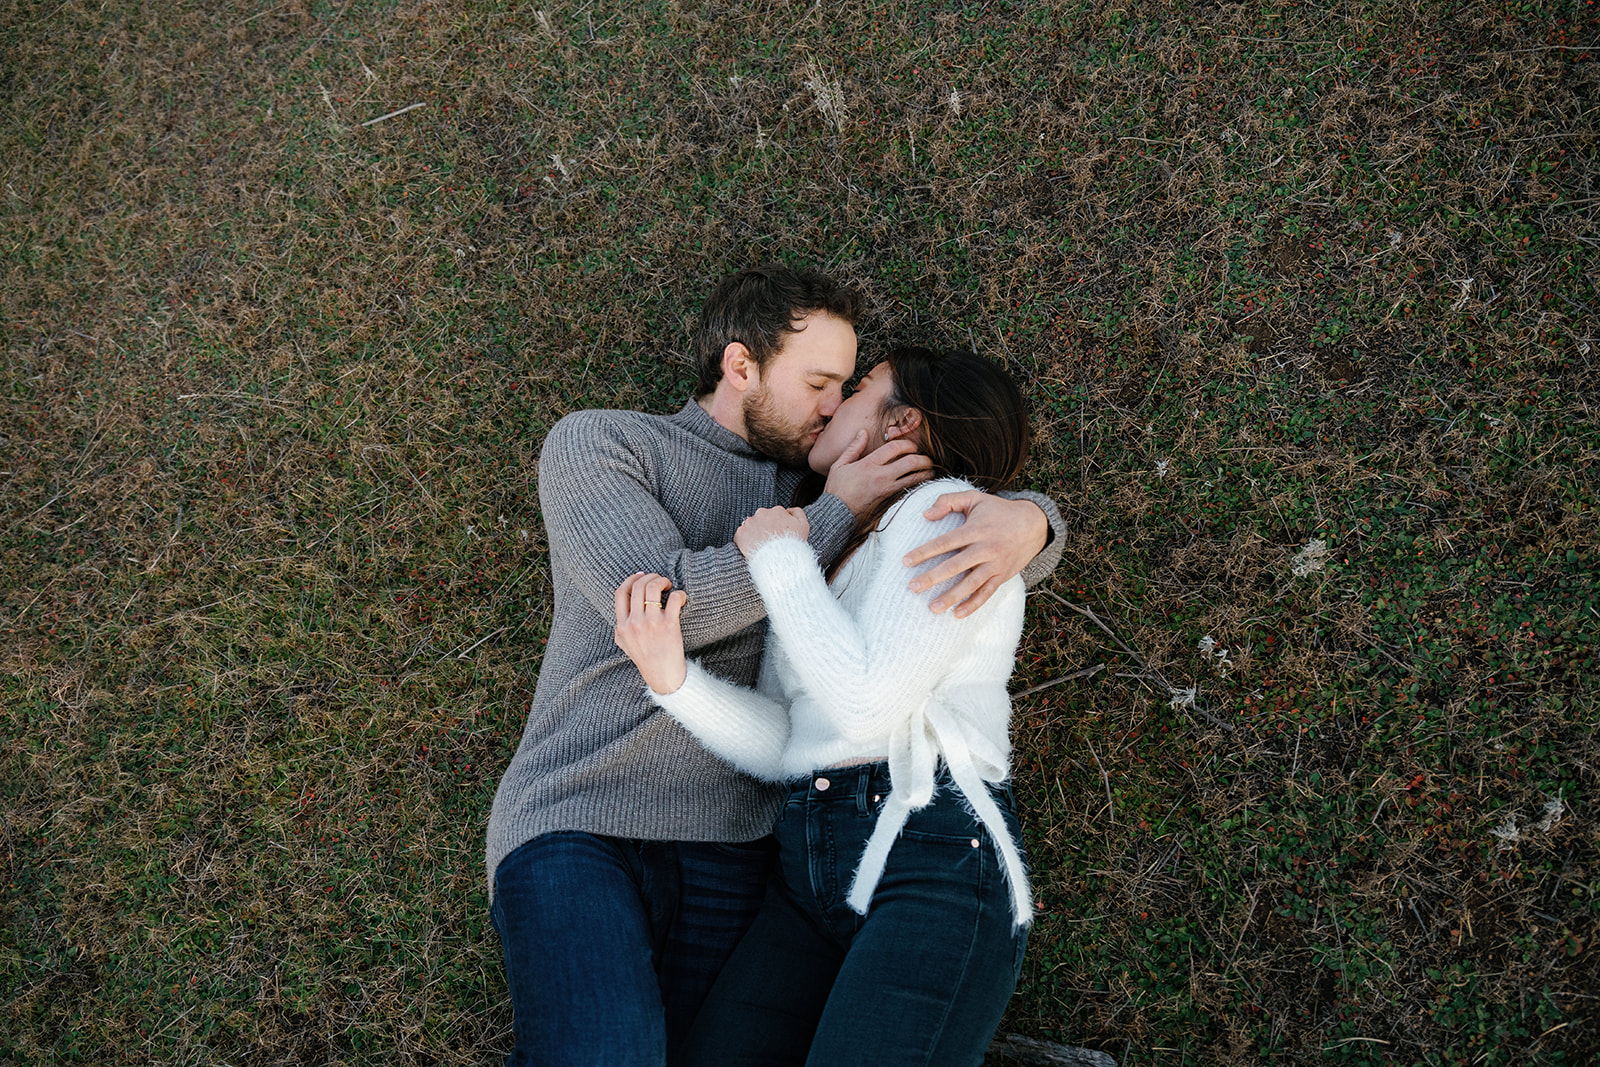 Romantic San Diego Engagement Photos; a man and woman laying down and kissing on the grass during their engagement photo session.